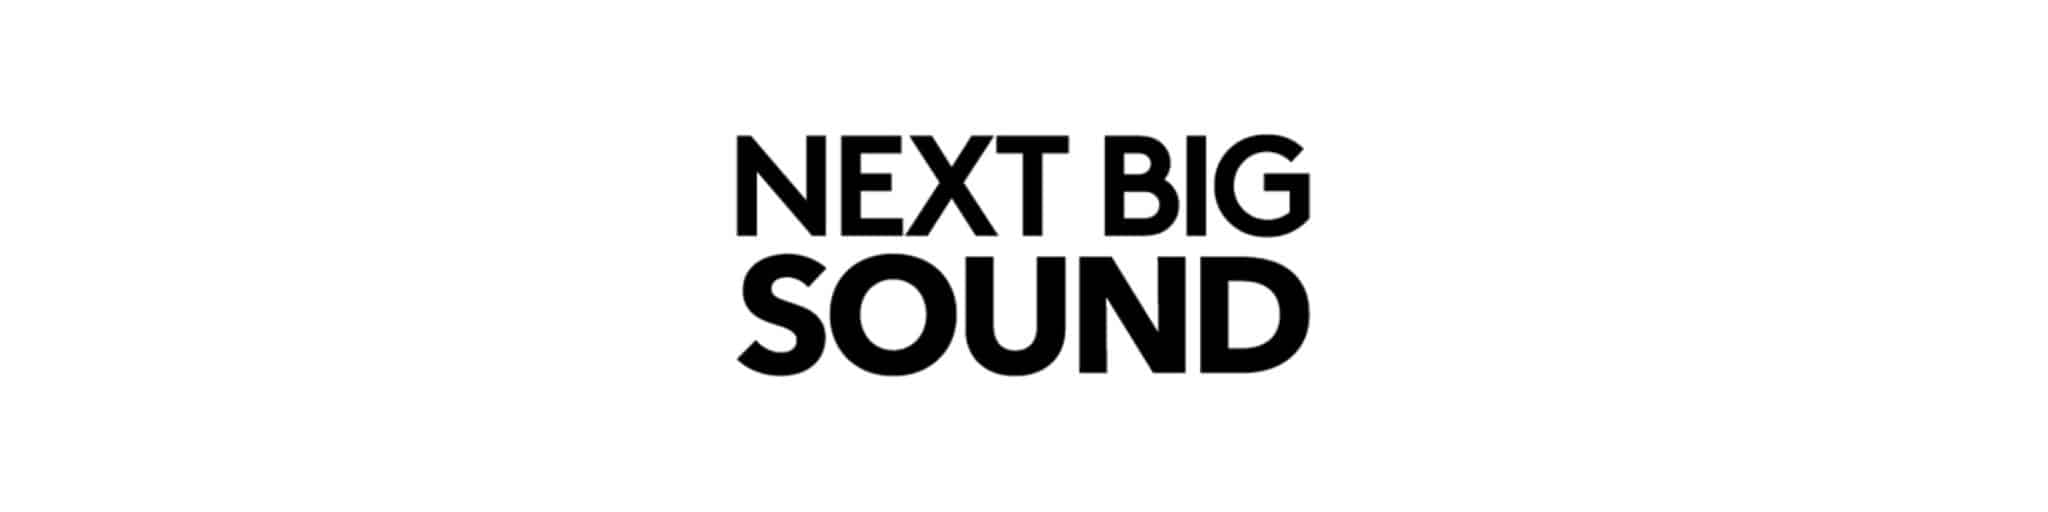 Next Big Sound in the top 8 Big Data solutions